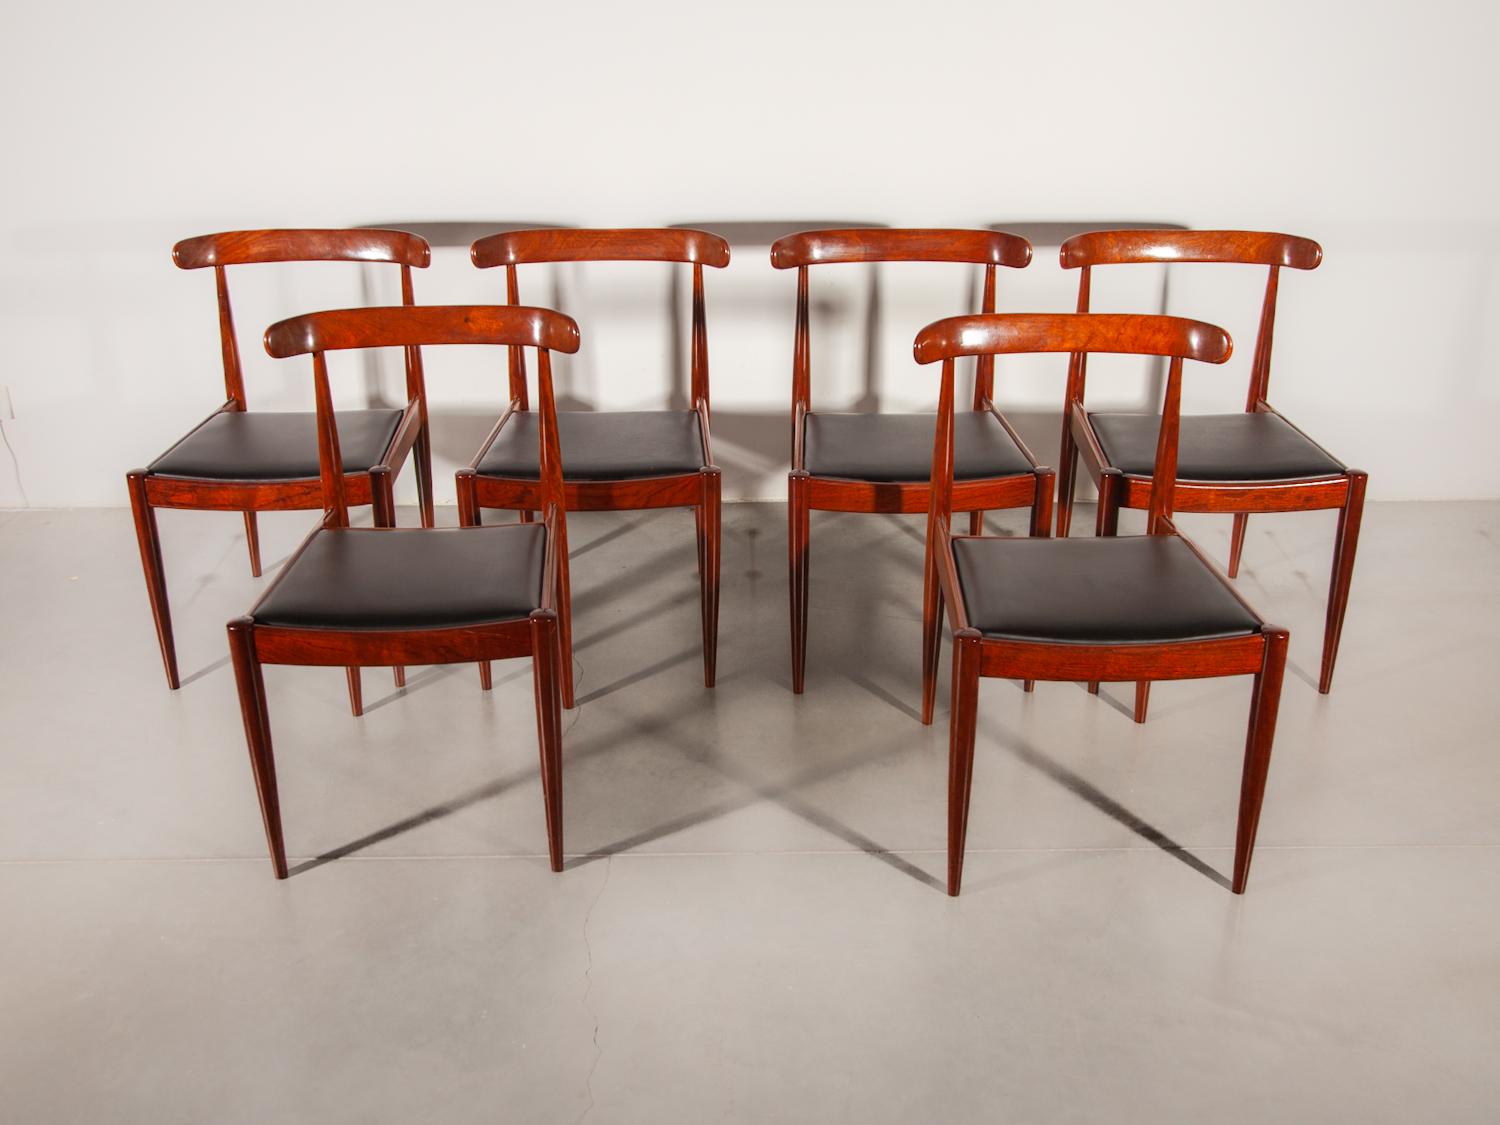 Minimalist set of 6 Dining Chairs designed by Alfred Hendrickx for Belform. A beautiful minimalist set with a nice woodgrain and black leather seats in a perfect condition.


Belgian designer Alfred Hendrickx was born in 1931. While information is